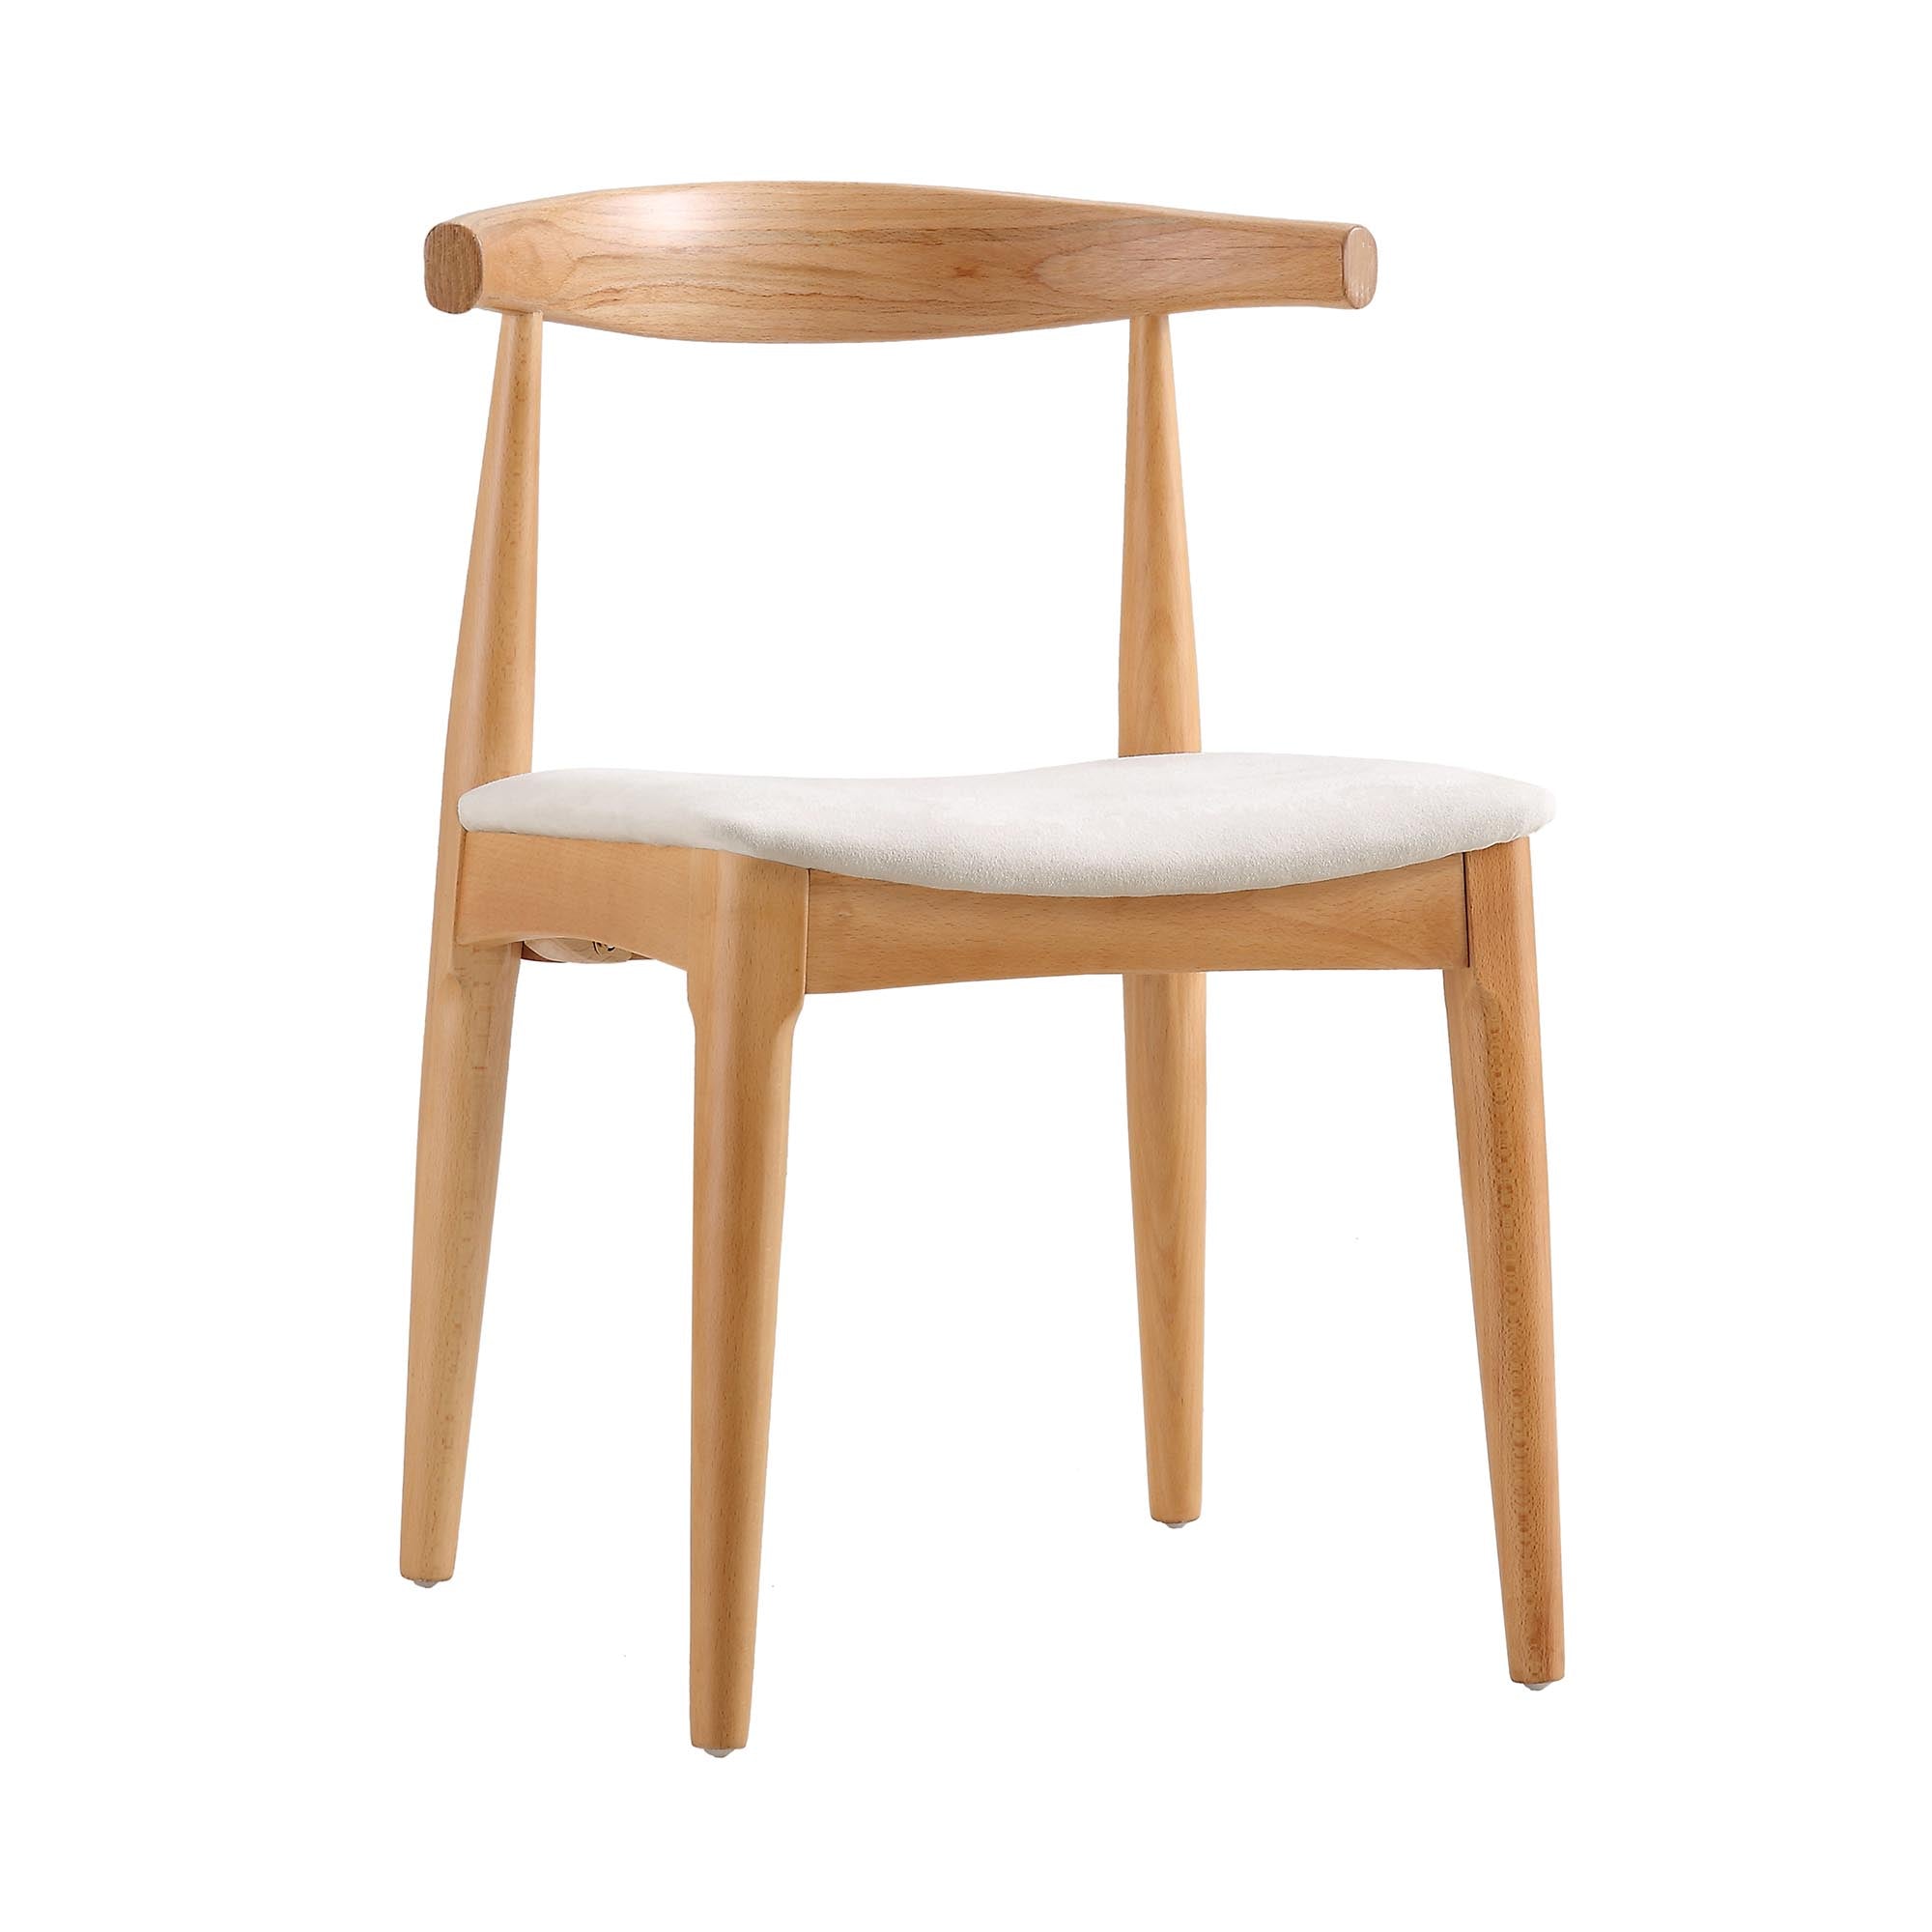 Arley Set of 2 Beech Wood Dining Chairs, Natural and Beige